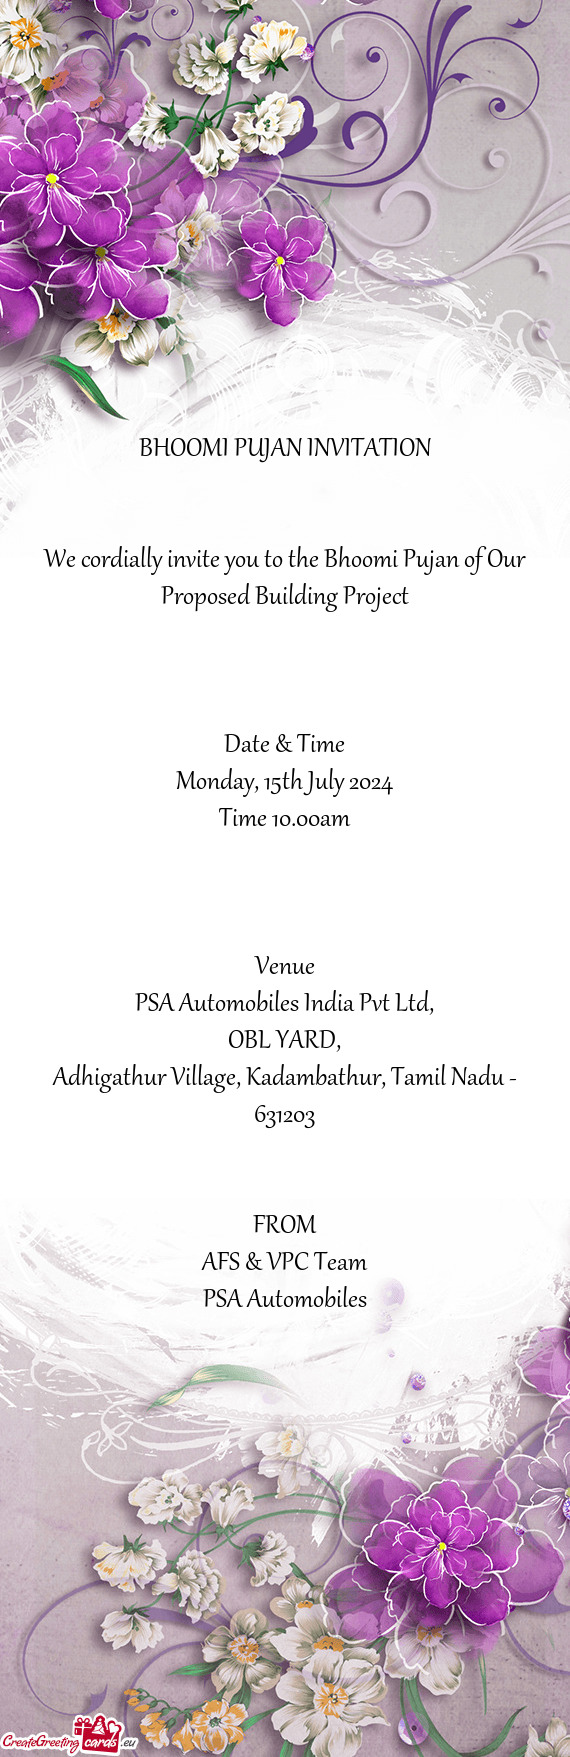 We cordially invite you to the Bhoomi Pujan of Our Proposed Building Project